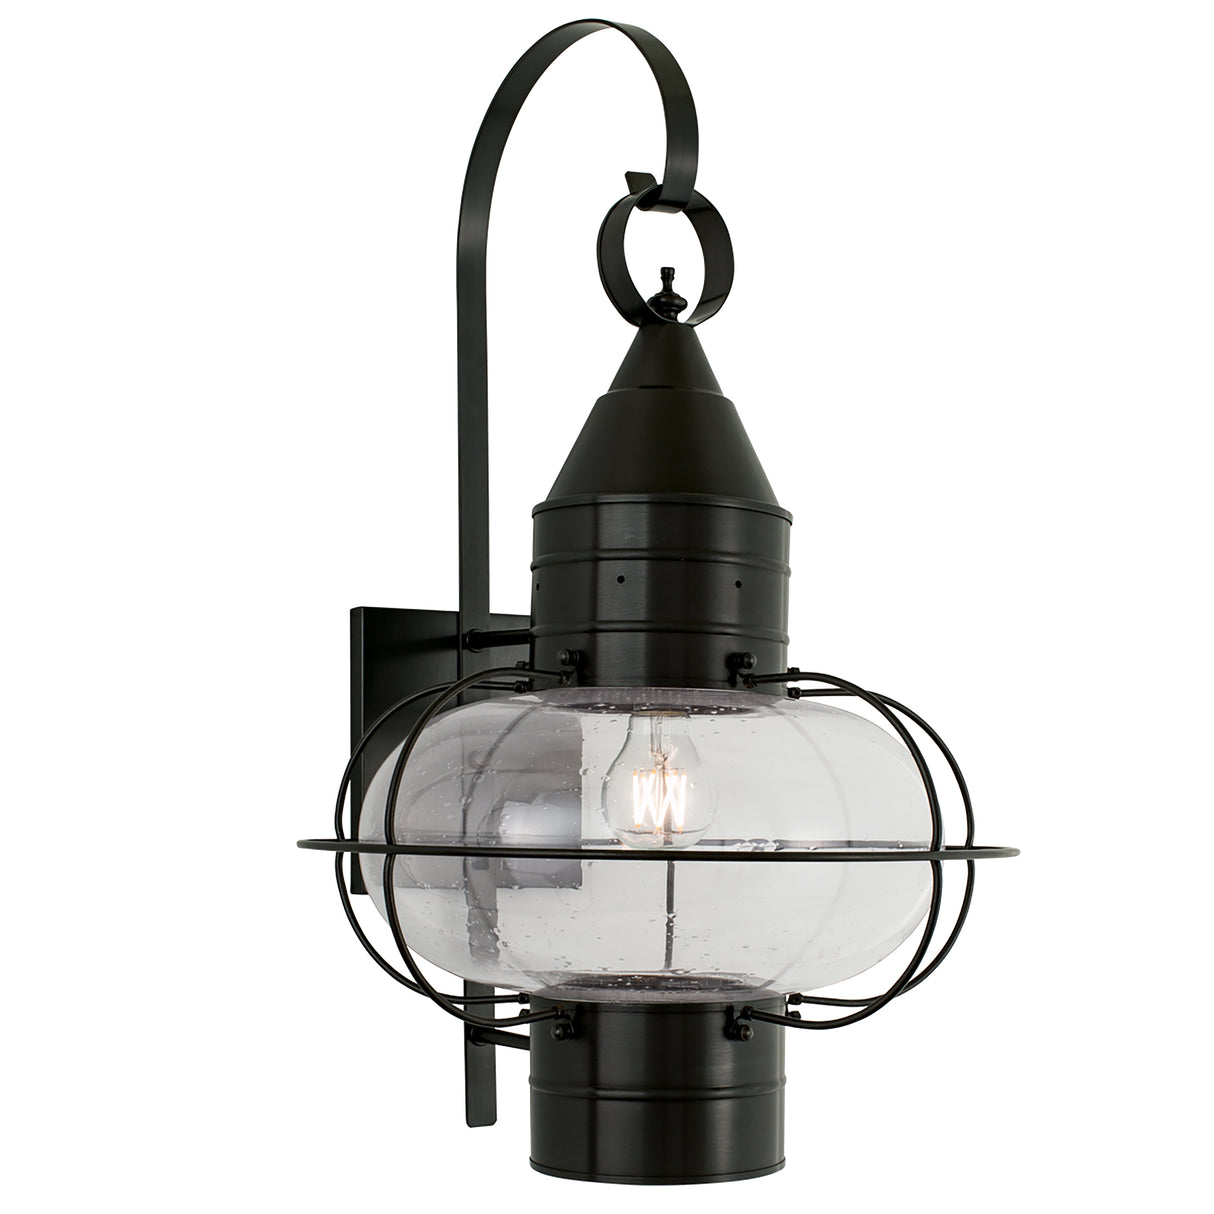 Elk 1509-BL-SE Classic Onion Outdoor Wall Light - Black with Seeded Glass